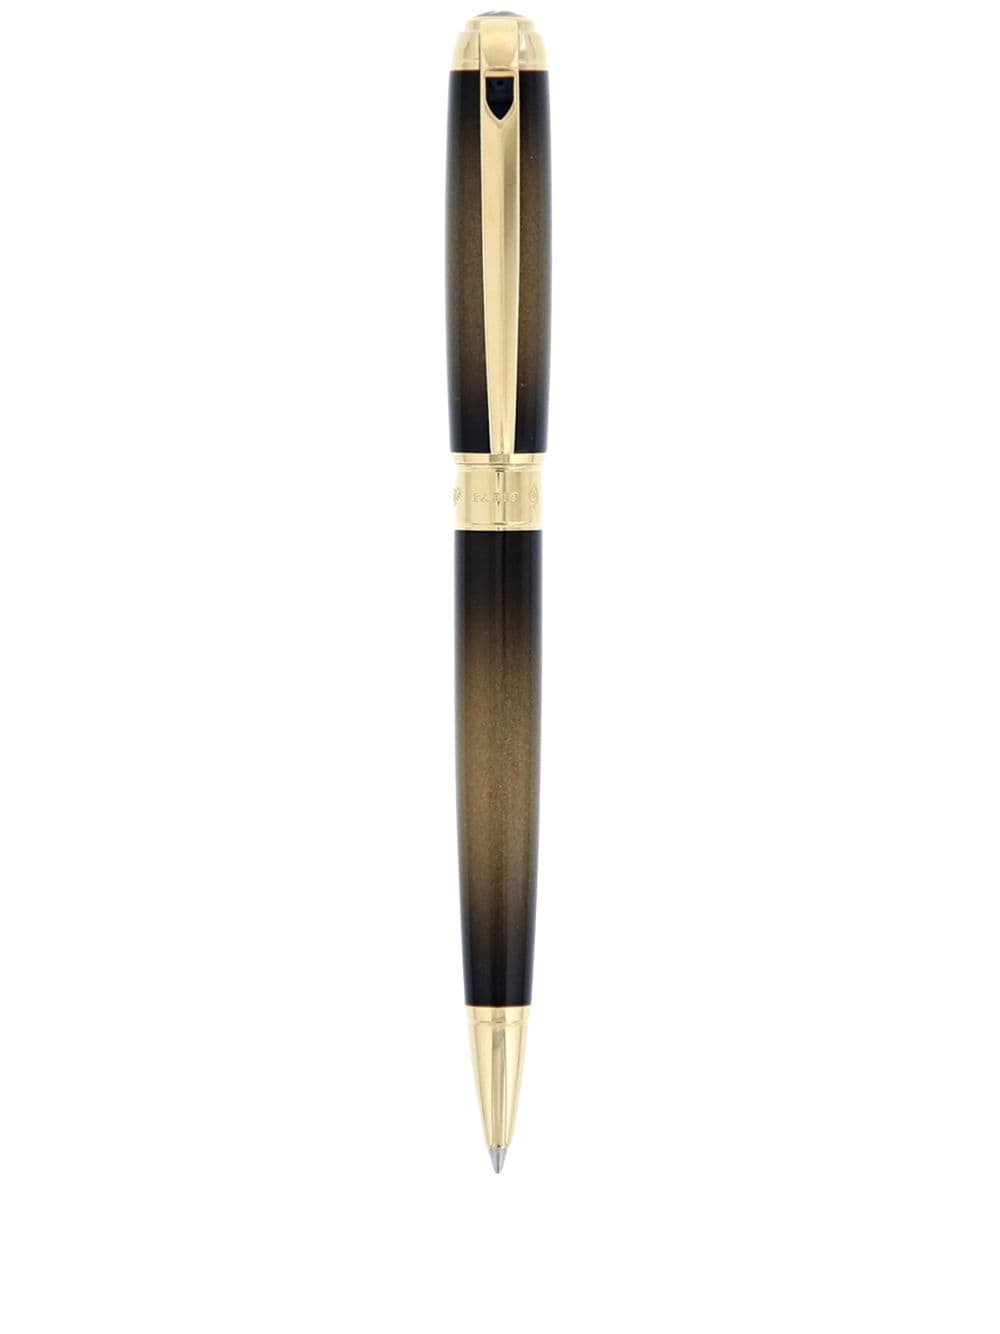 St Dupont Line D Fountain Pen In Black